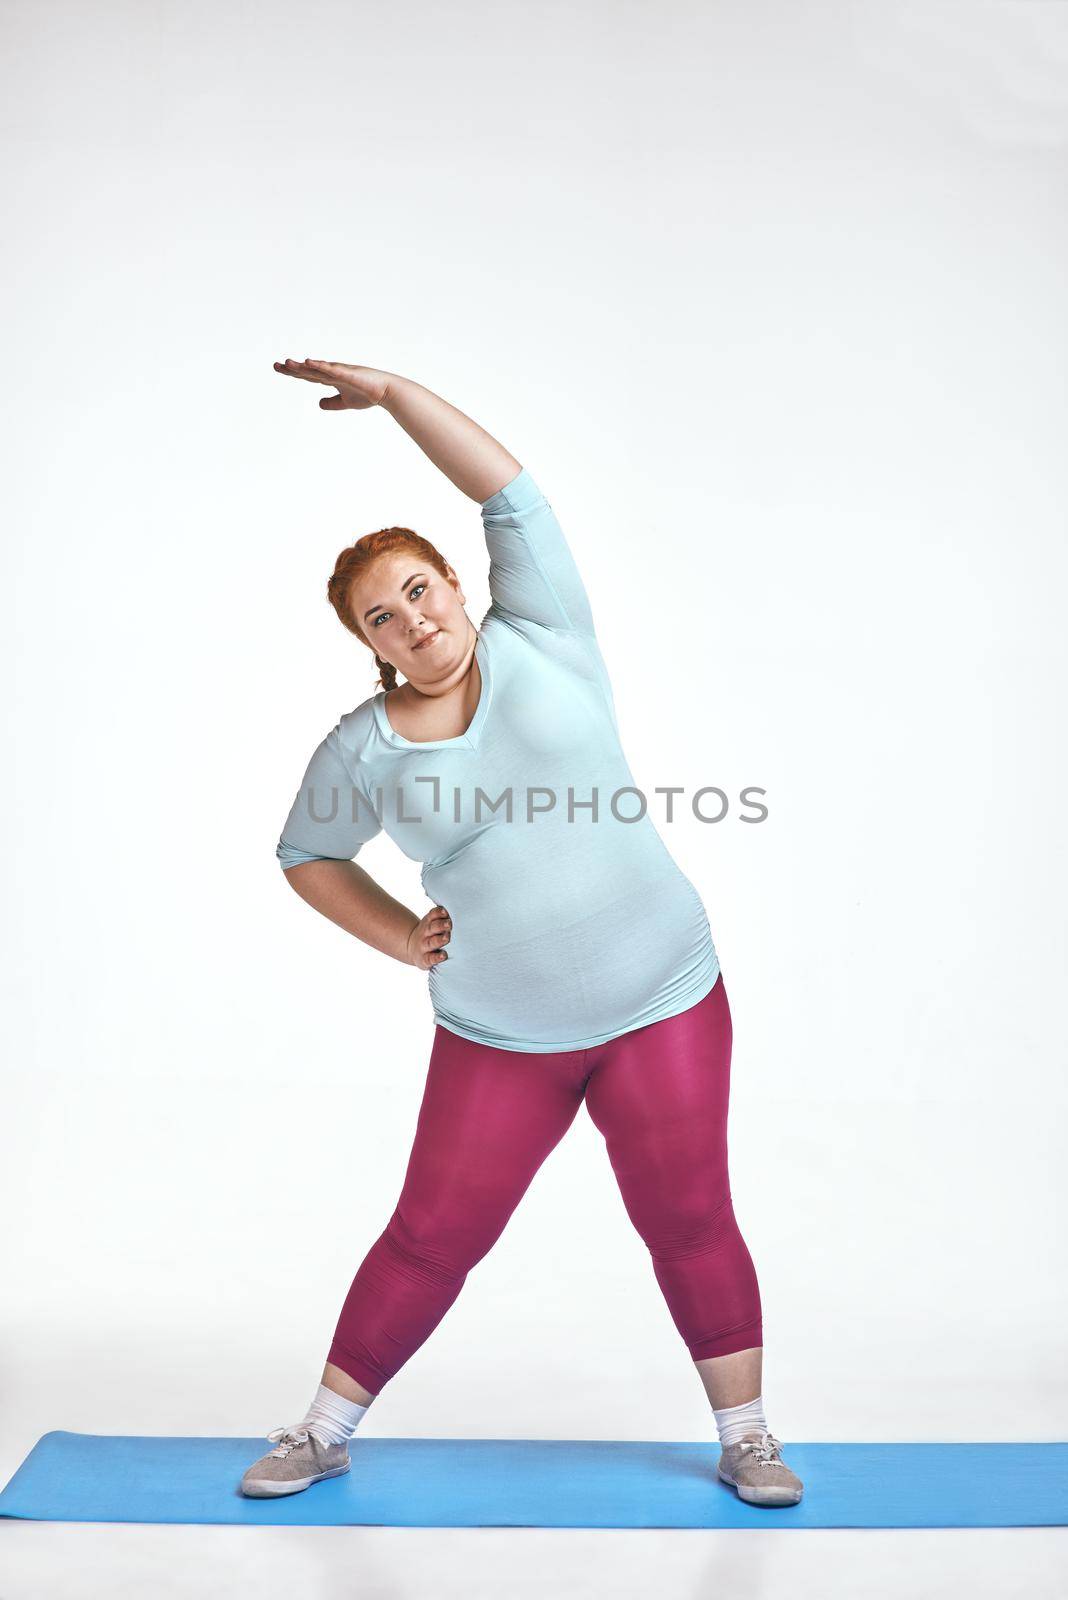 Amusing, red haired, chubby woman trains on the mat by friendsstock